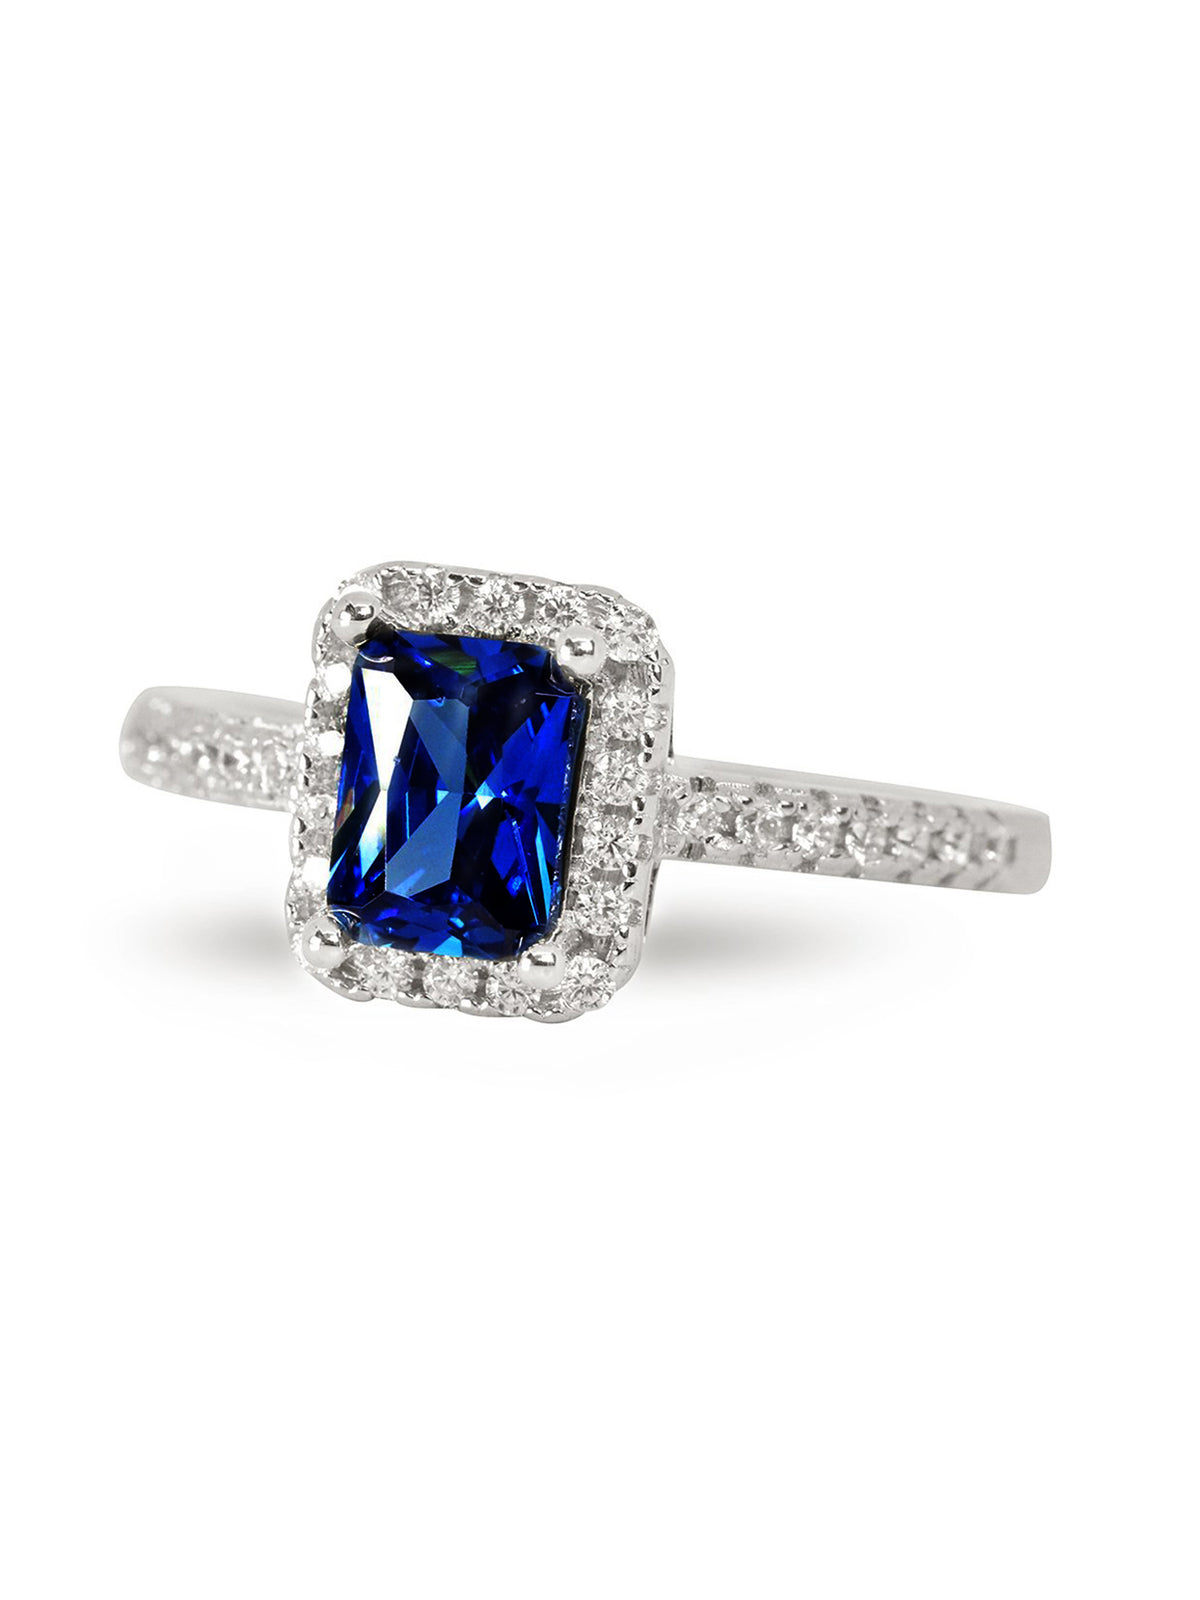 OCATGON LAB CREATED BLUE SAPPHIRE RING FOR HER-6